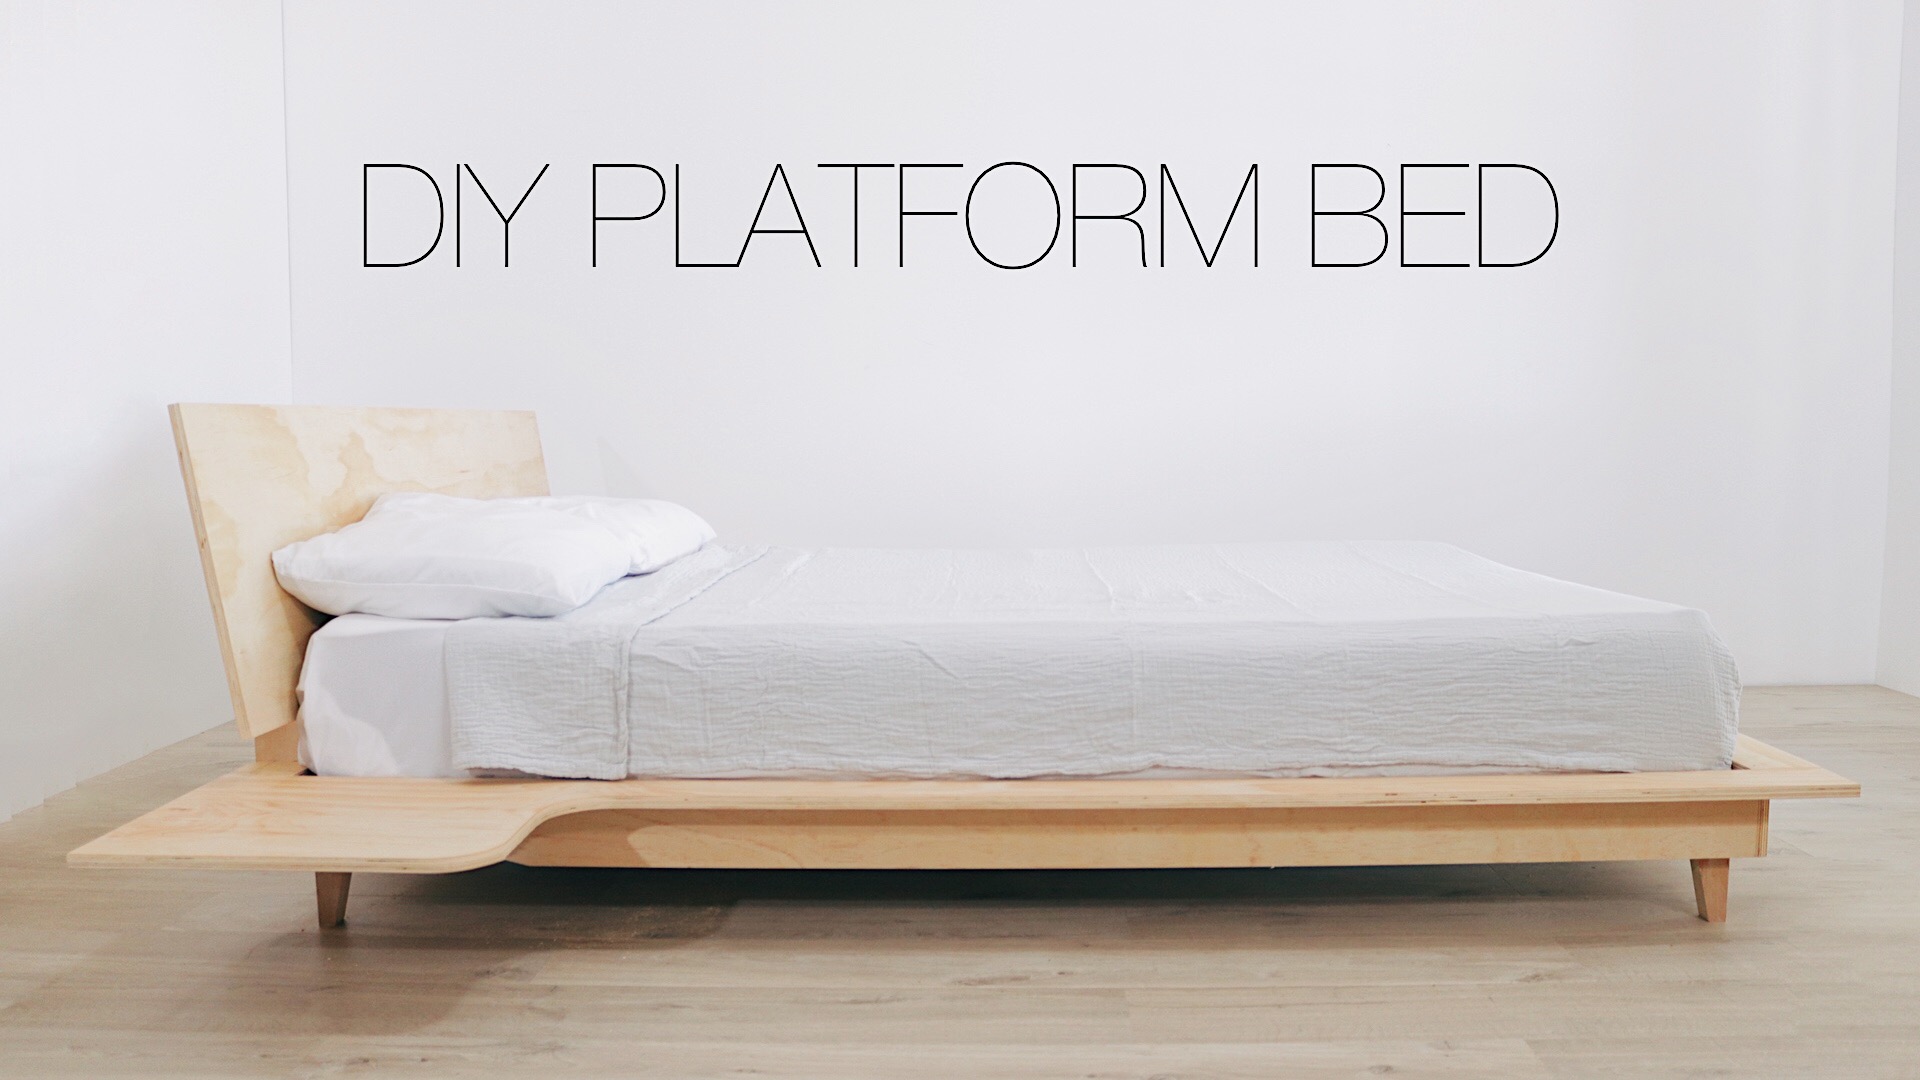  How to build a Plywood Platform Bed with Built-in Nightstands by: Mike Montgomery | Modern Builds 